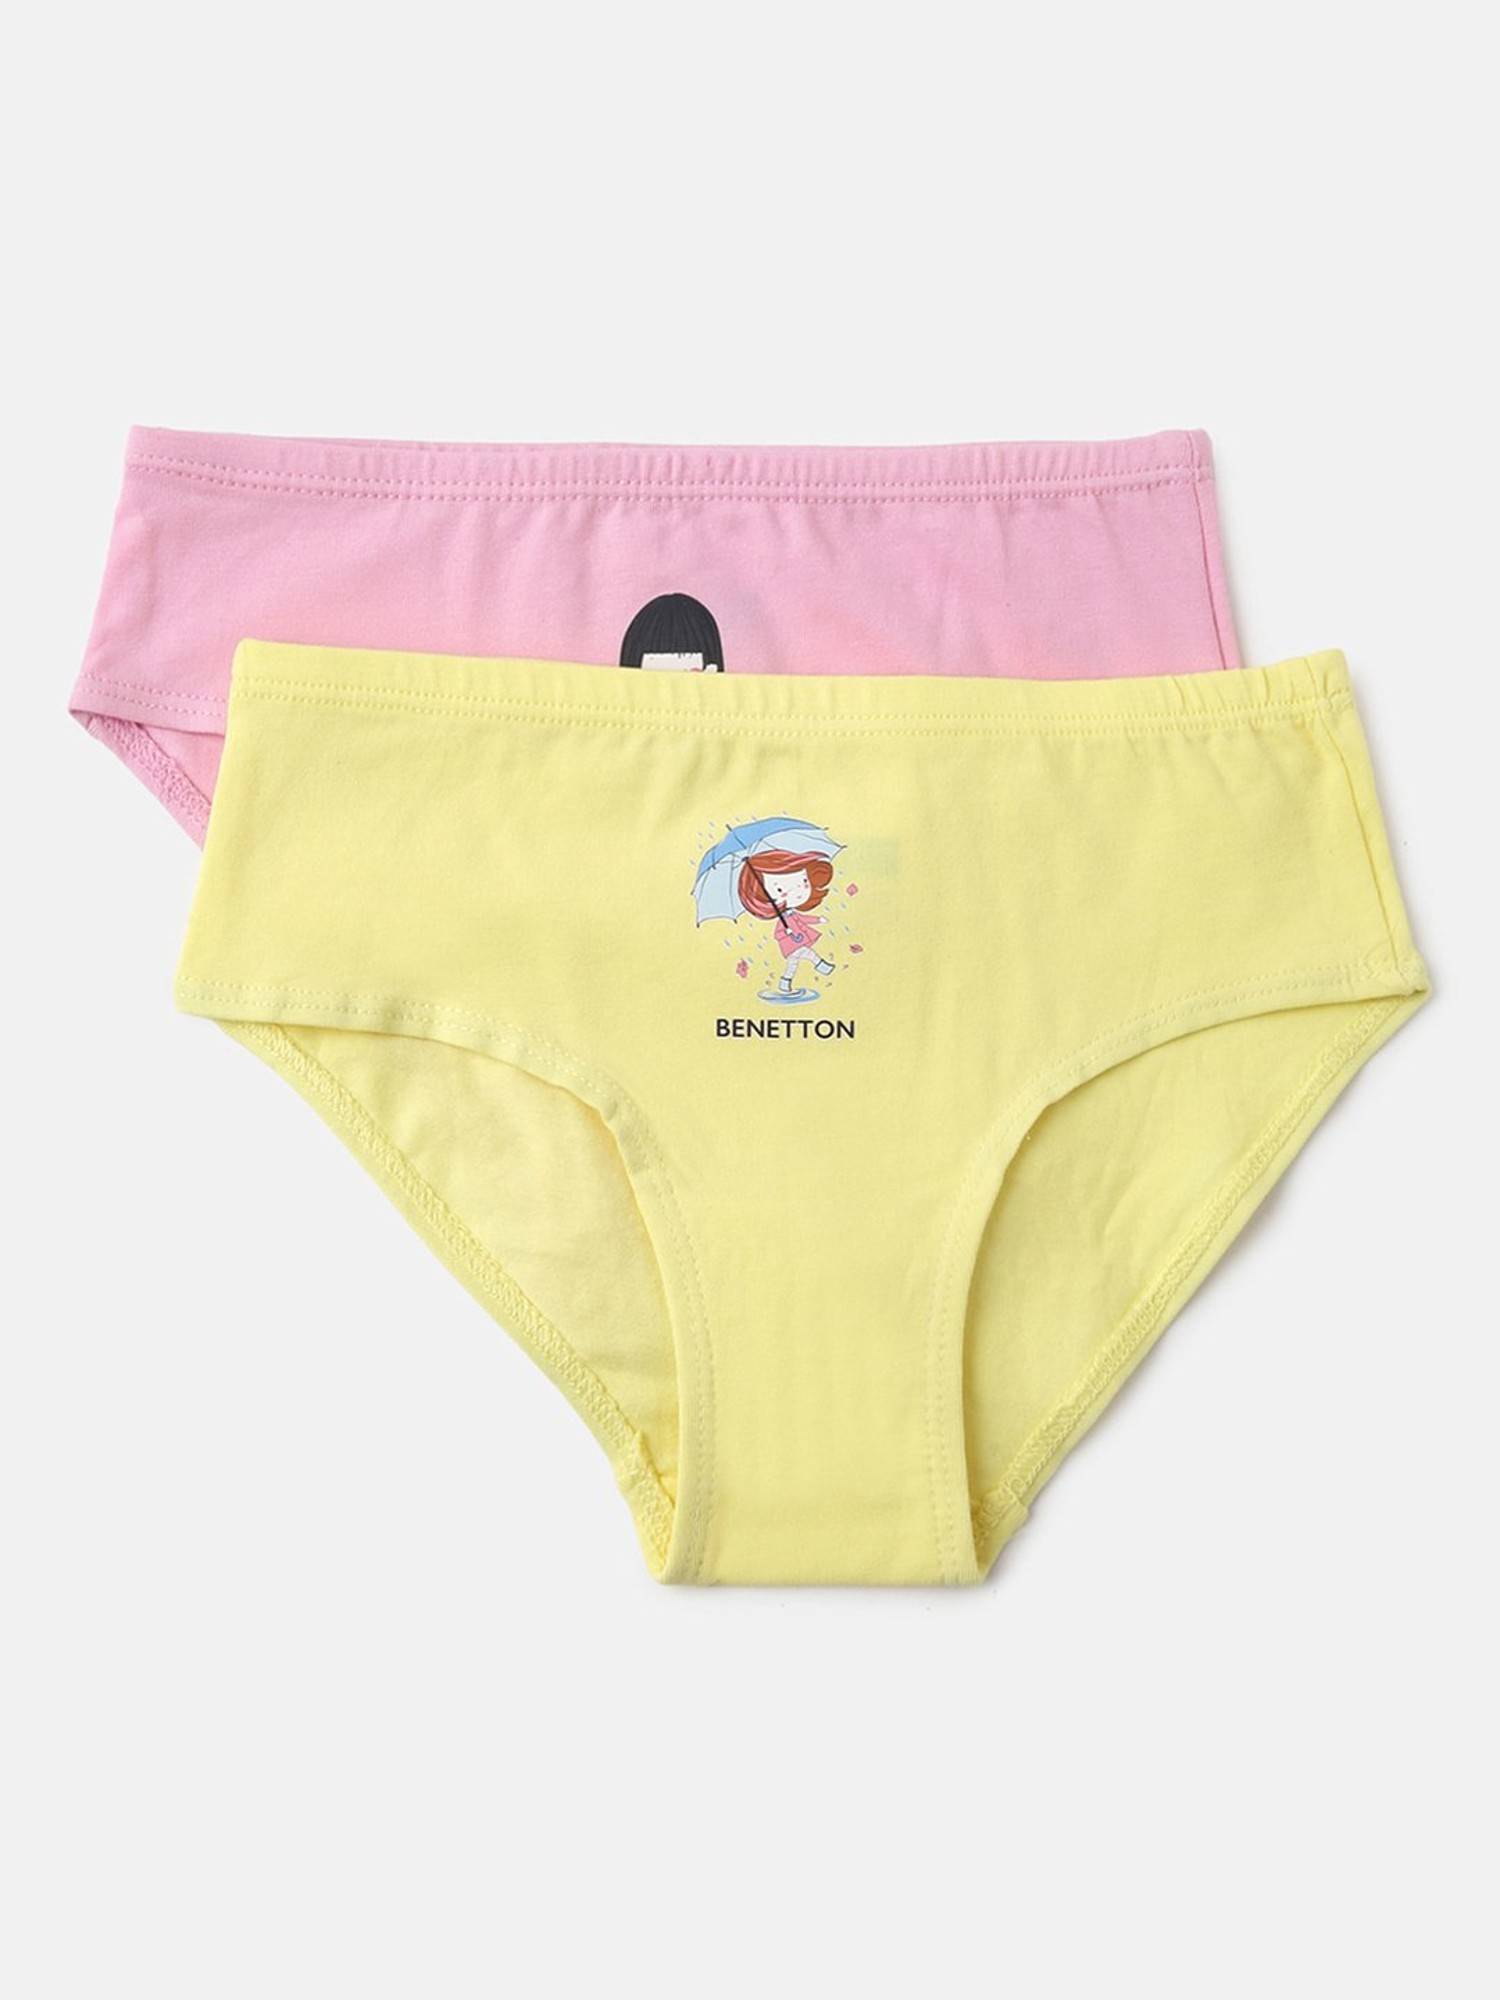 United Colors of Benetton Kids Light Pink & Yellow Printed Panties